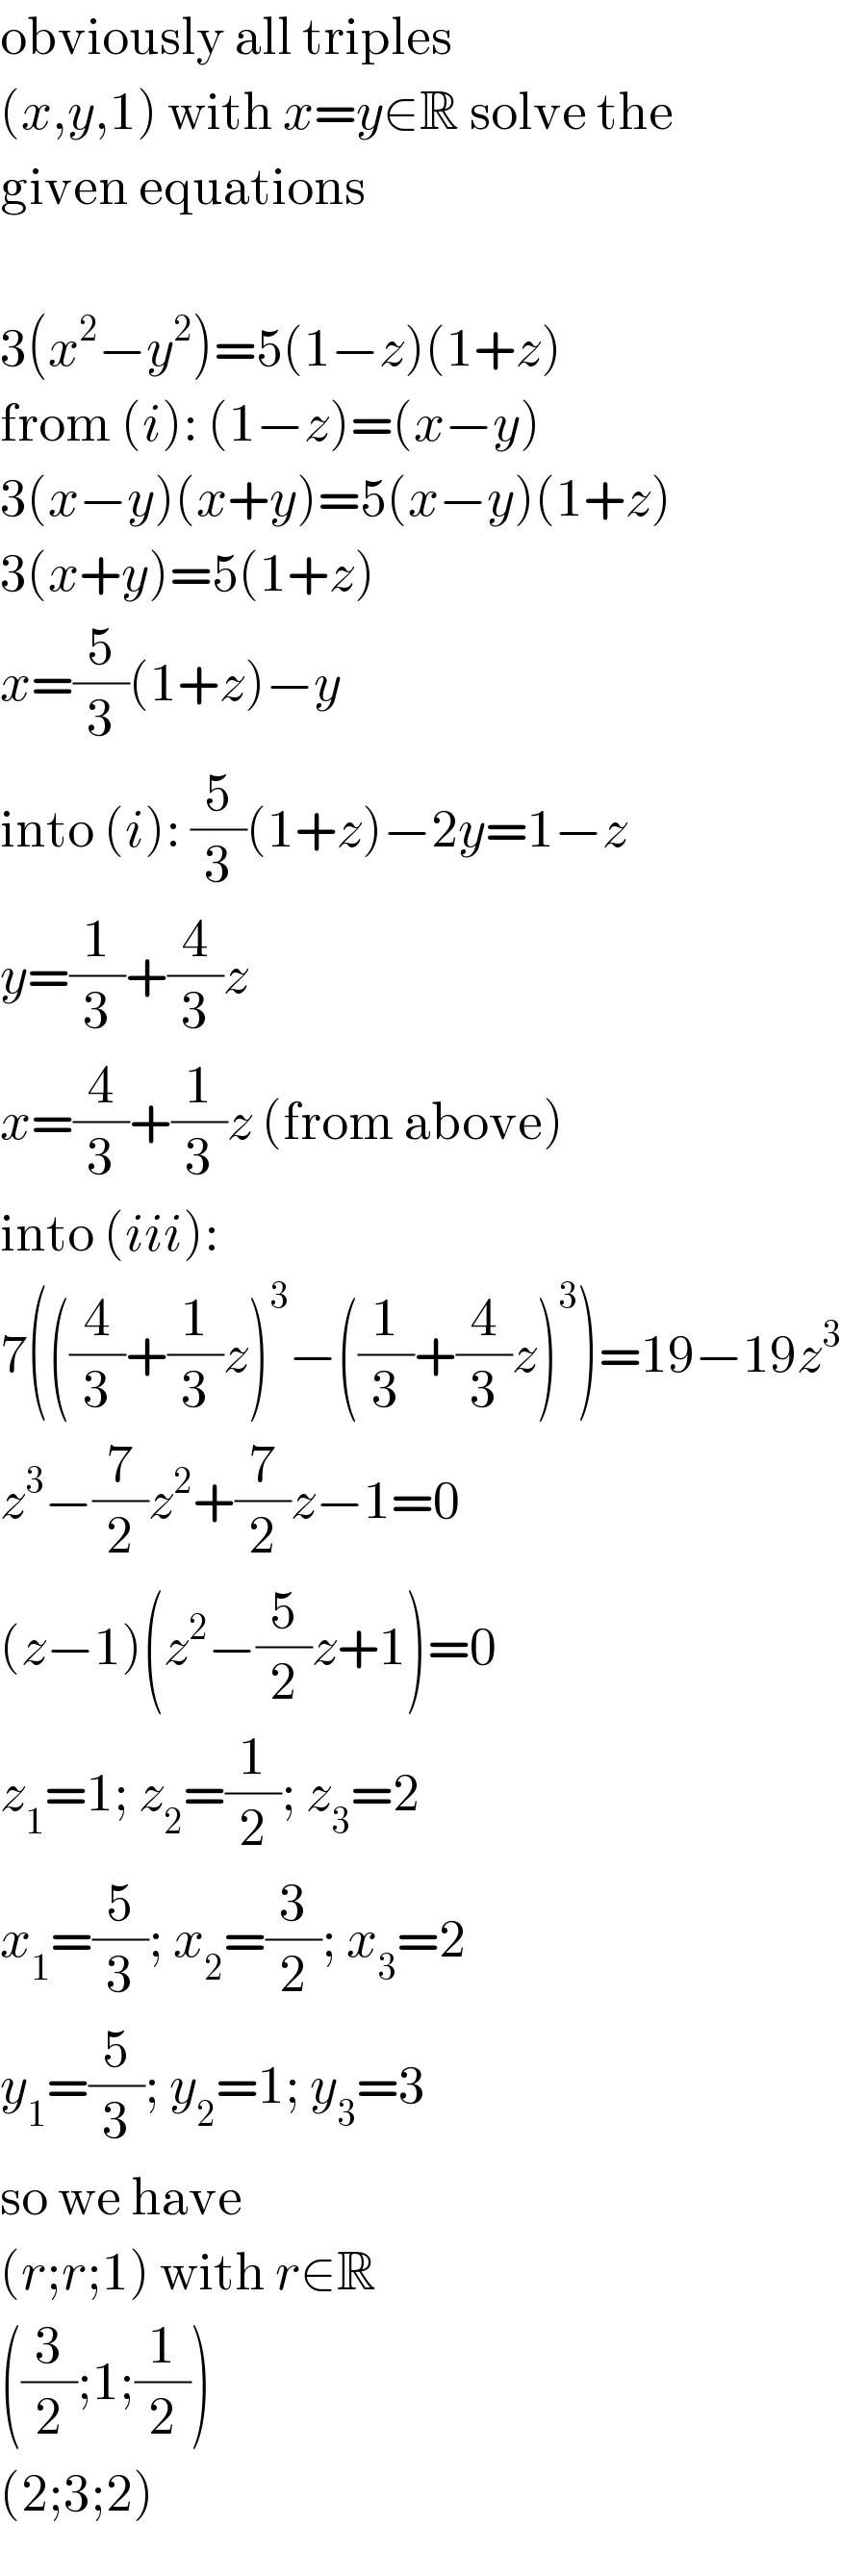 obviously all triples  (x,y,1) with x=y∈R solve the  given equations    3(x^2 −y^2 )=5(1−z)(1+z)  from (i): (1−z)=(x−y)  3(x−y)(x+y)=5(x−y)(1+z)  3(x+y)=5(1+z)  x=(5/3)(1+z)−y  into (i): (5/3)(1+z)−2y=1−z  y=(1/3)+(4/3)z  x=(4/3)+(1/3)z (from above)  into (iii):  7(((4/3)+(1/3)z)^3 −((1/3)+(4/3)z)^3 )=19−19z^3   z^3 −(7/2)z^2 +(7/2)z−1=0  (z−1)(z^2 −(5/2)z+1)=0  z_1 =1; z_2 =(1/2); z_3 =2  x_1 =(5/3); x_2 =(3/2); x_3 =2  y_1 =(5/3); y_2 =1; y_3 =3  so we have  (r;r;1) with r∈R  ((3/2);1;(1/2))  (2;3;2)  